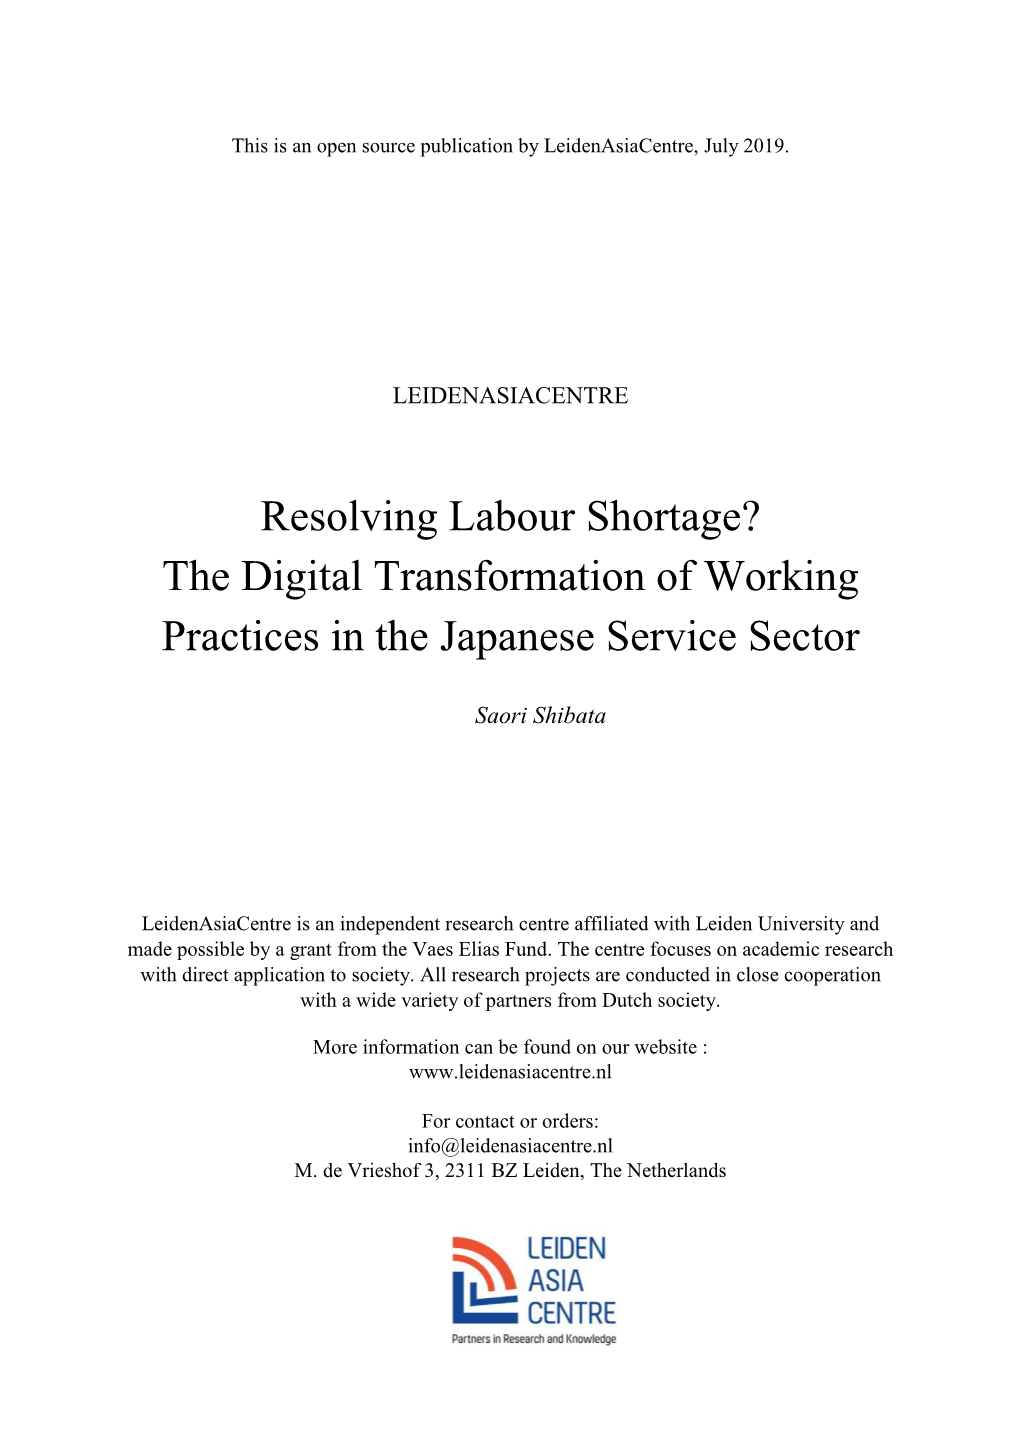 Resolving Labour Shortage? the Digital Transformation of Working Practices in the Japanese Service Sector